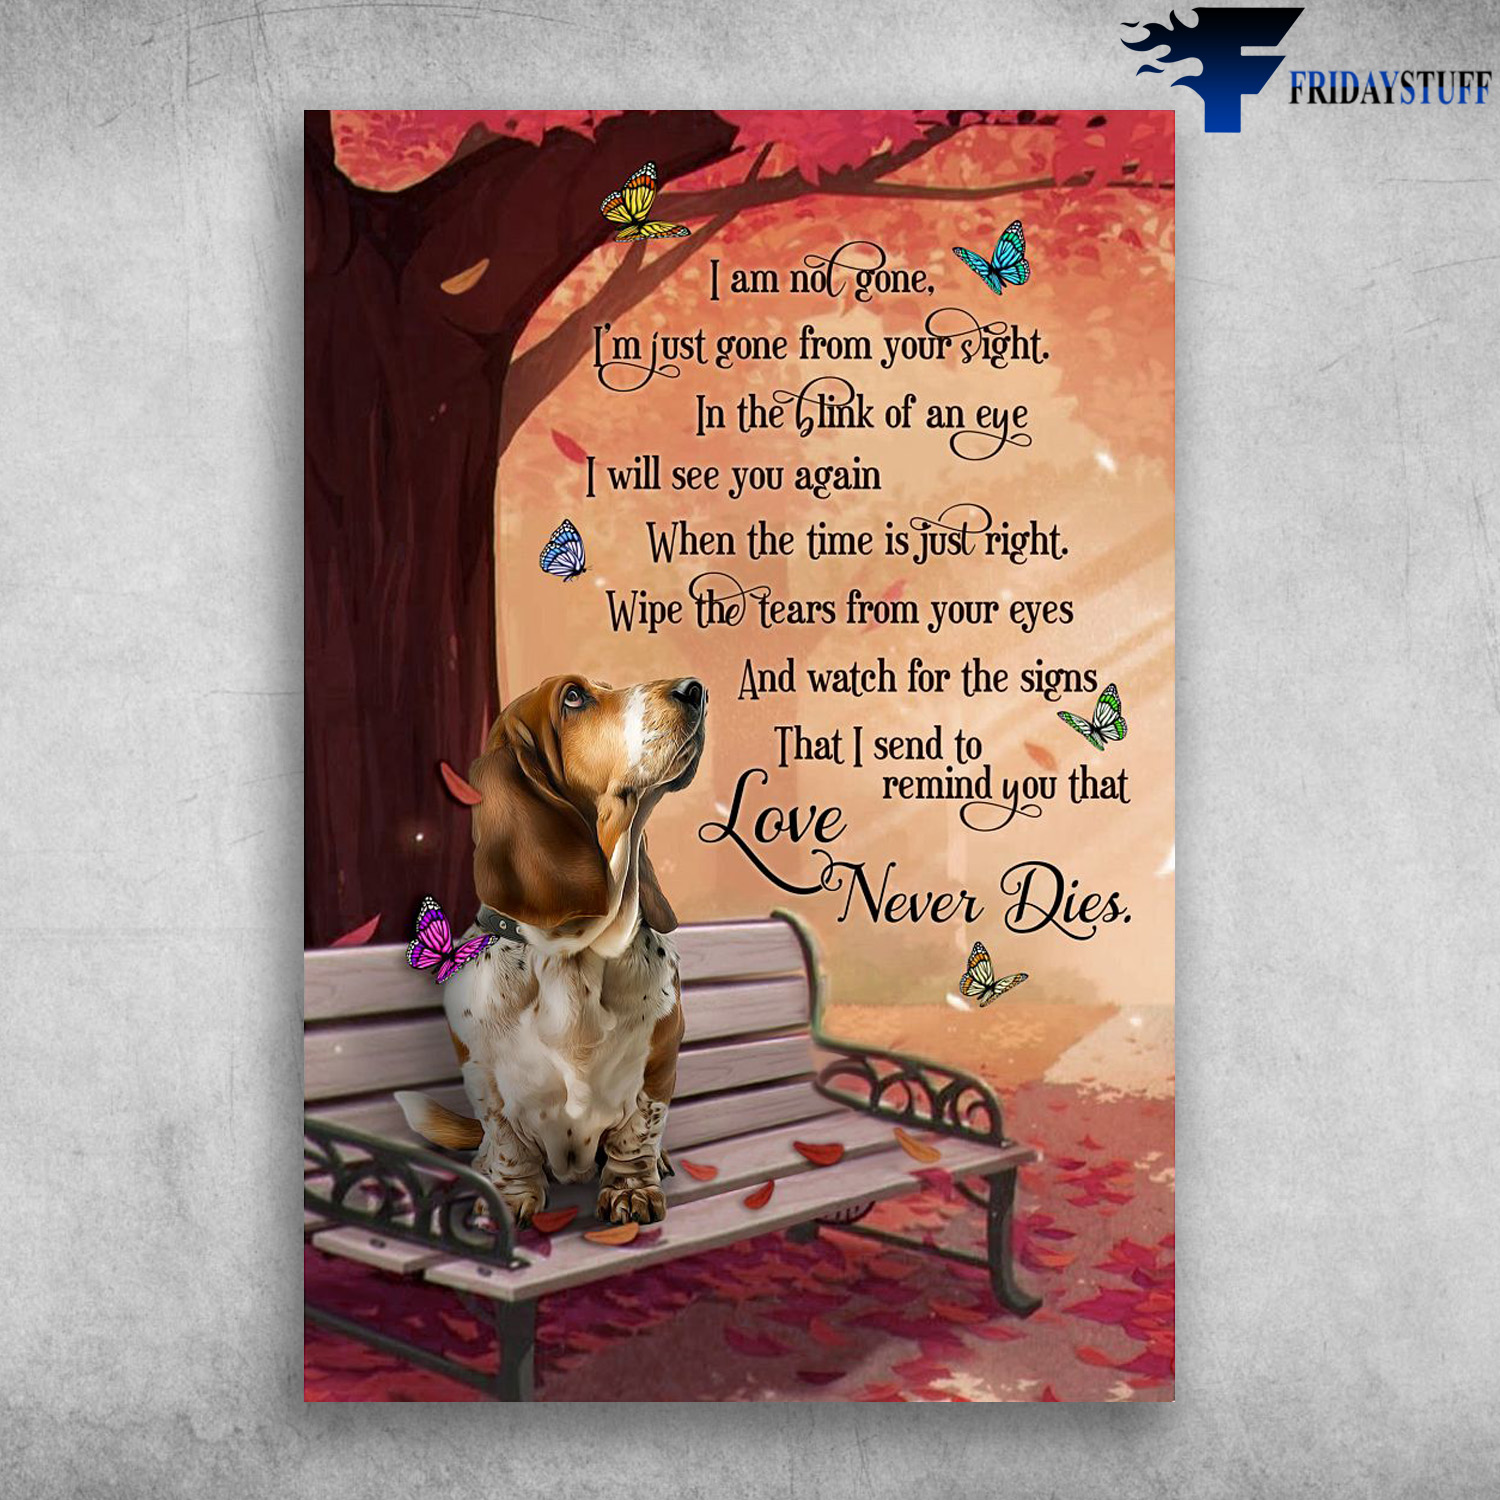 Basset Hound And Butterfly - I Am Not Gone, I'm Just Gone From Your Sight, In The Blink Of An Eye, I Will See You Again, When The Time Is Just Right, Wipe The Tears From Your Eyes, And Watch For The Signs, Love Never Dies